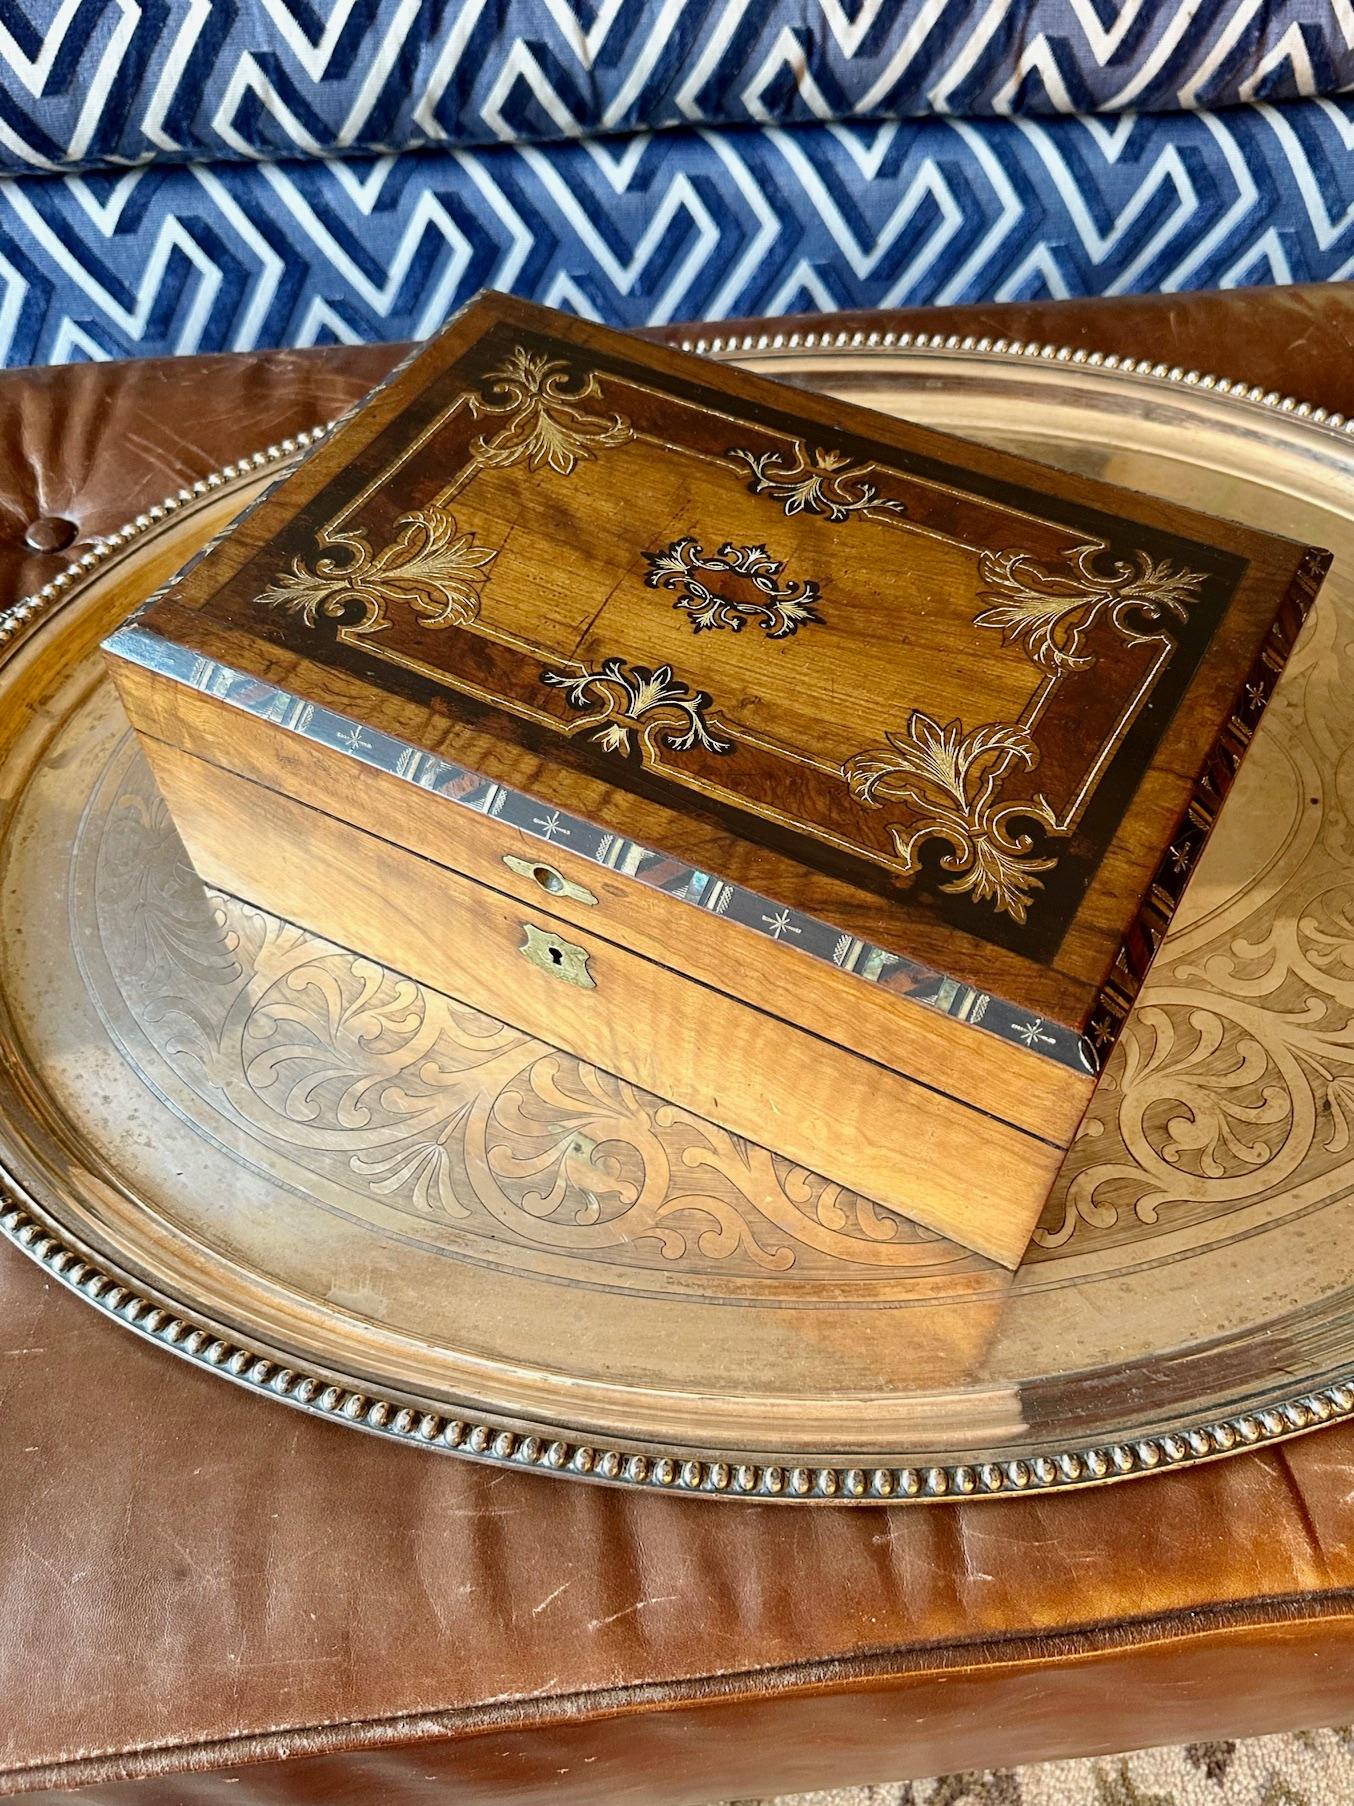 Offered is an exquisite, 19th Century European lap desk box with abalone and wood inlay. Brass escutcheon and felt velvet lining. Does not include original key. 